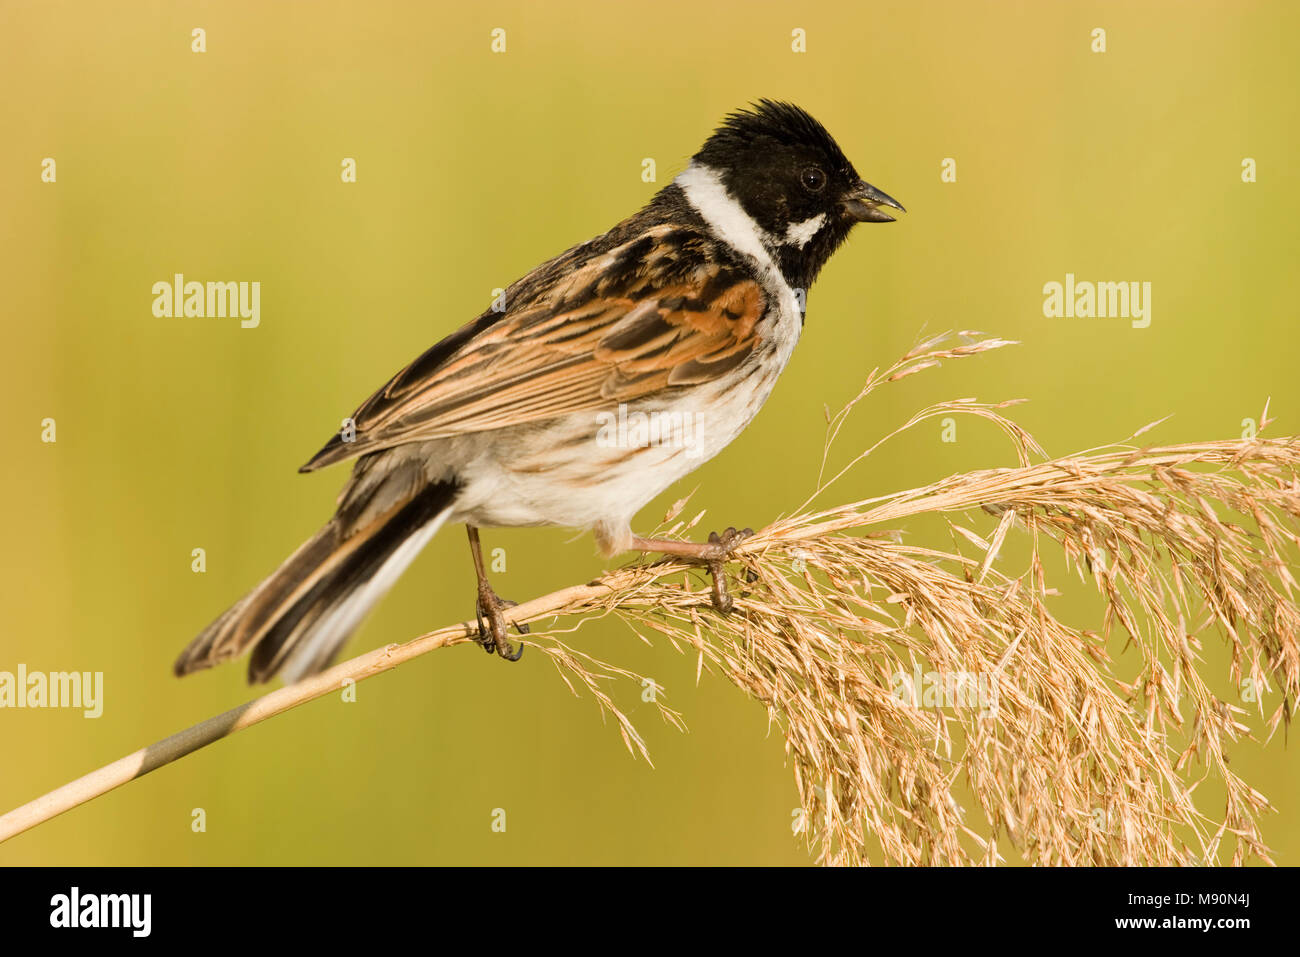 Mannetje Rietgors op rietstengel Nederland, Male Common Reed Bunting on reed stalk Netherlands Stock Photo